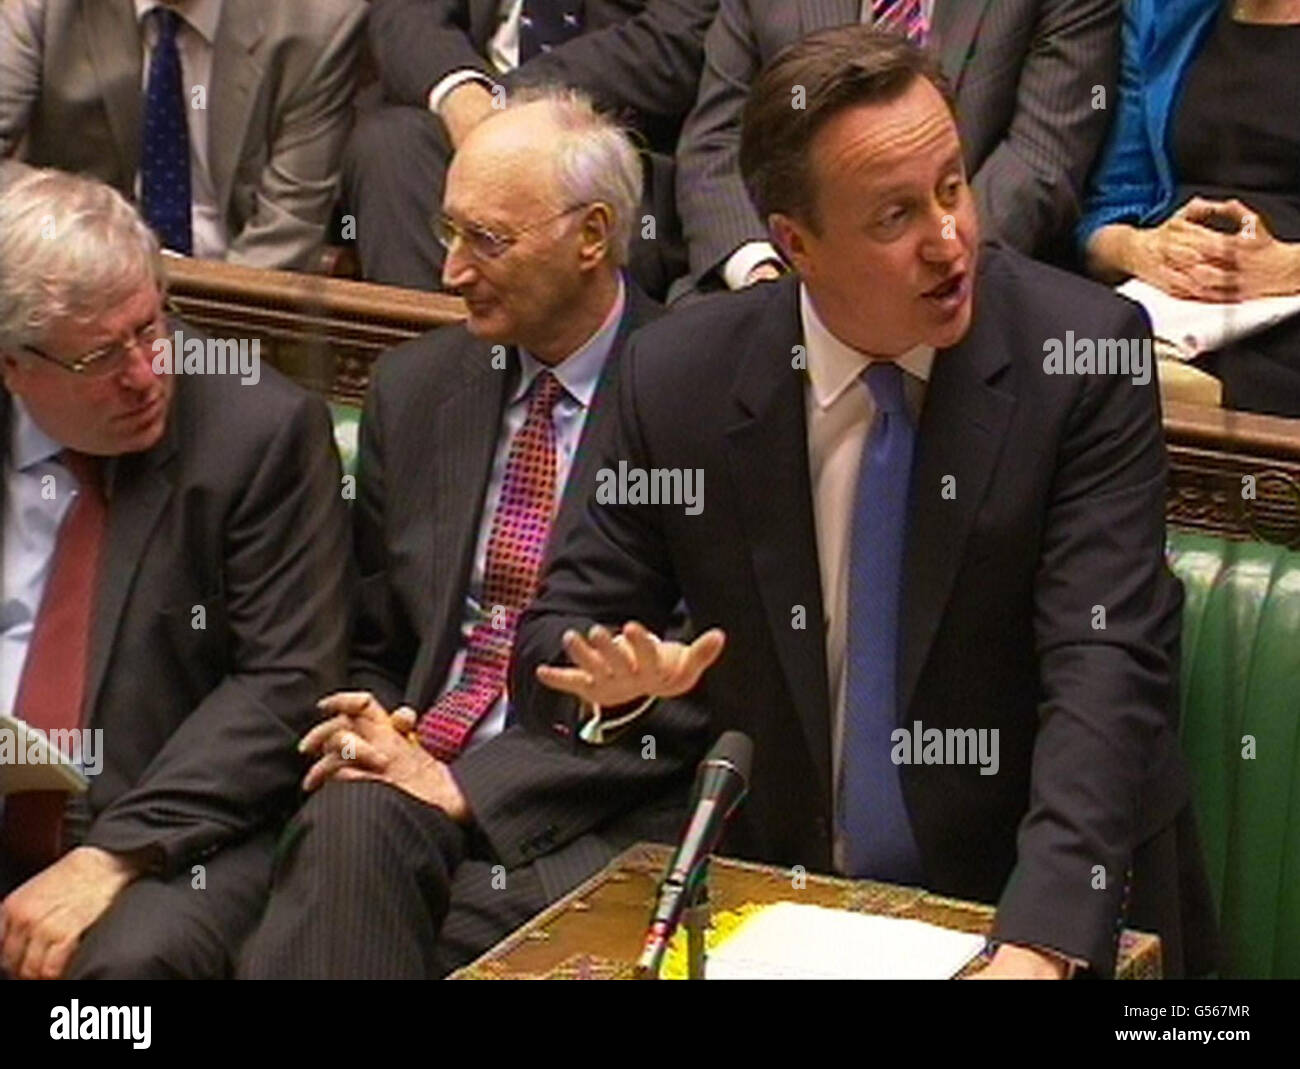 Prime Minister David Cameron speaks during Prime Minister's Questions in the House of Commons, London. Stock Photo